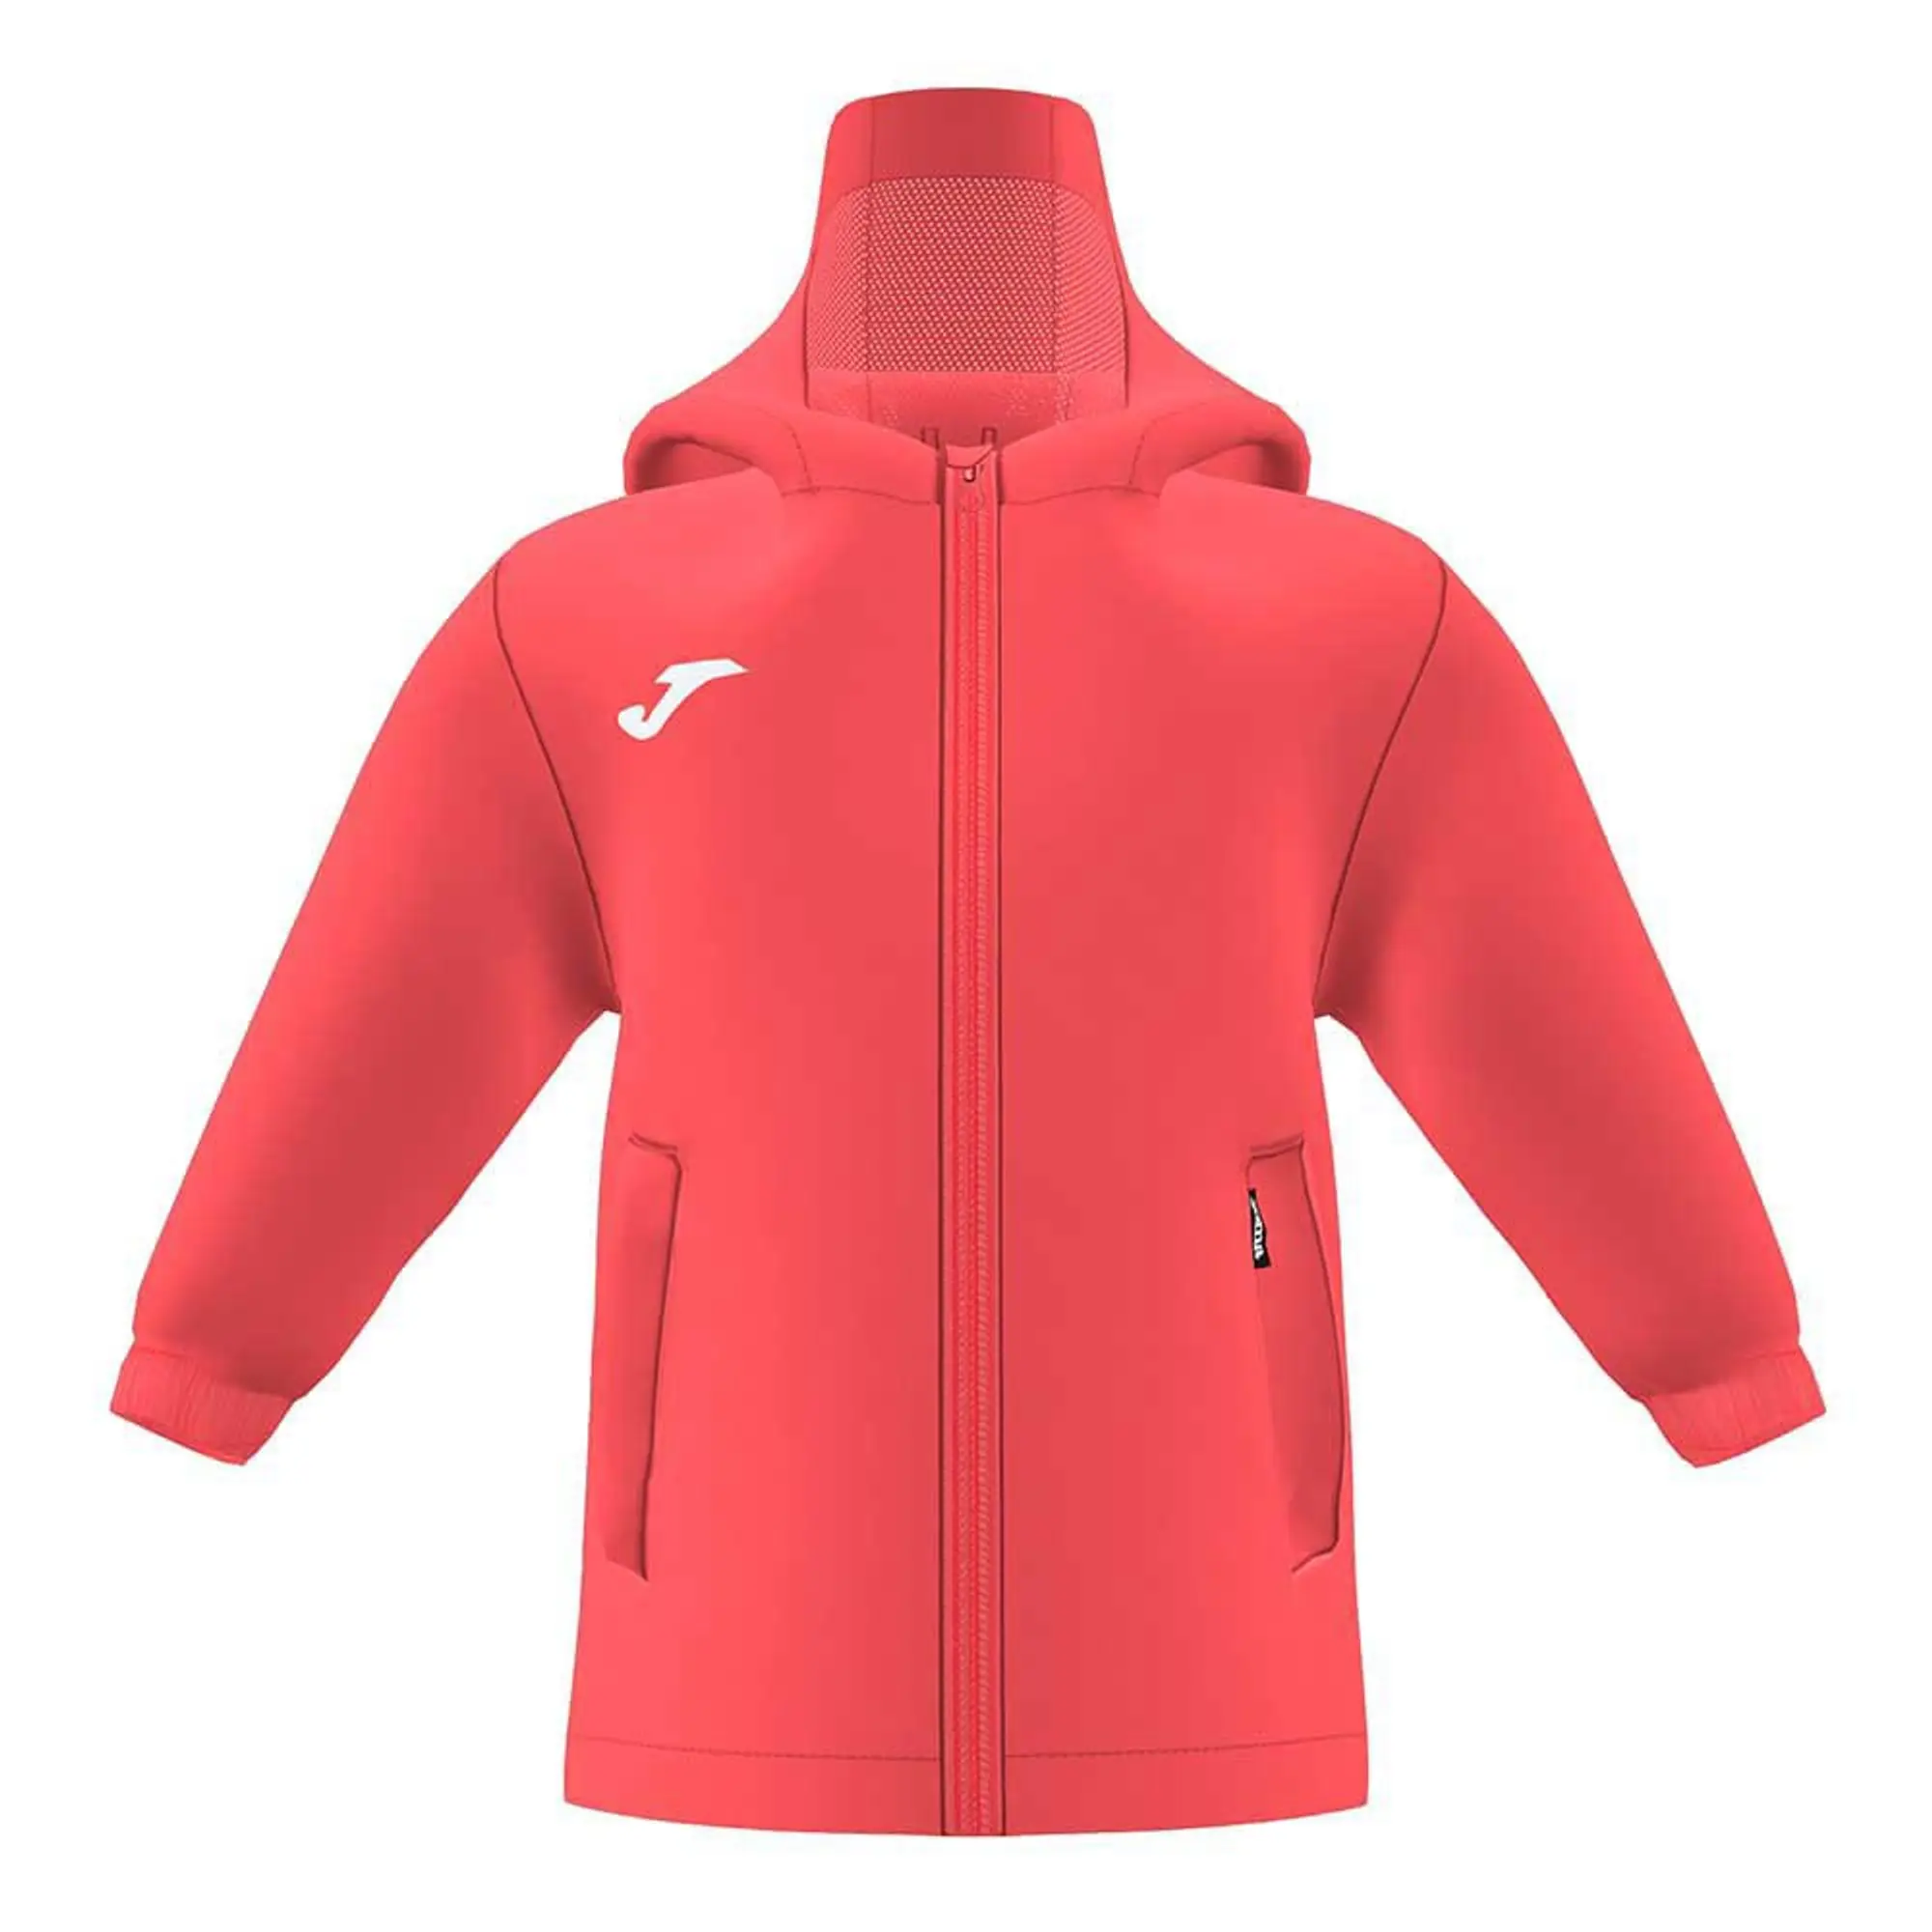 Joma Lion Jacket  - Red